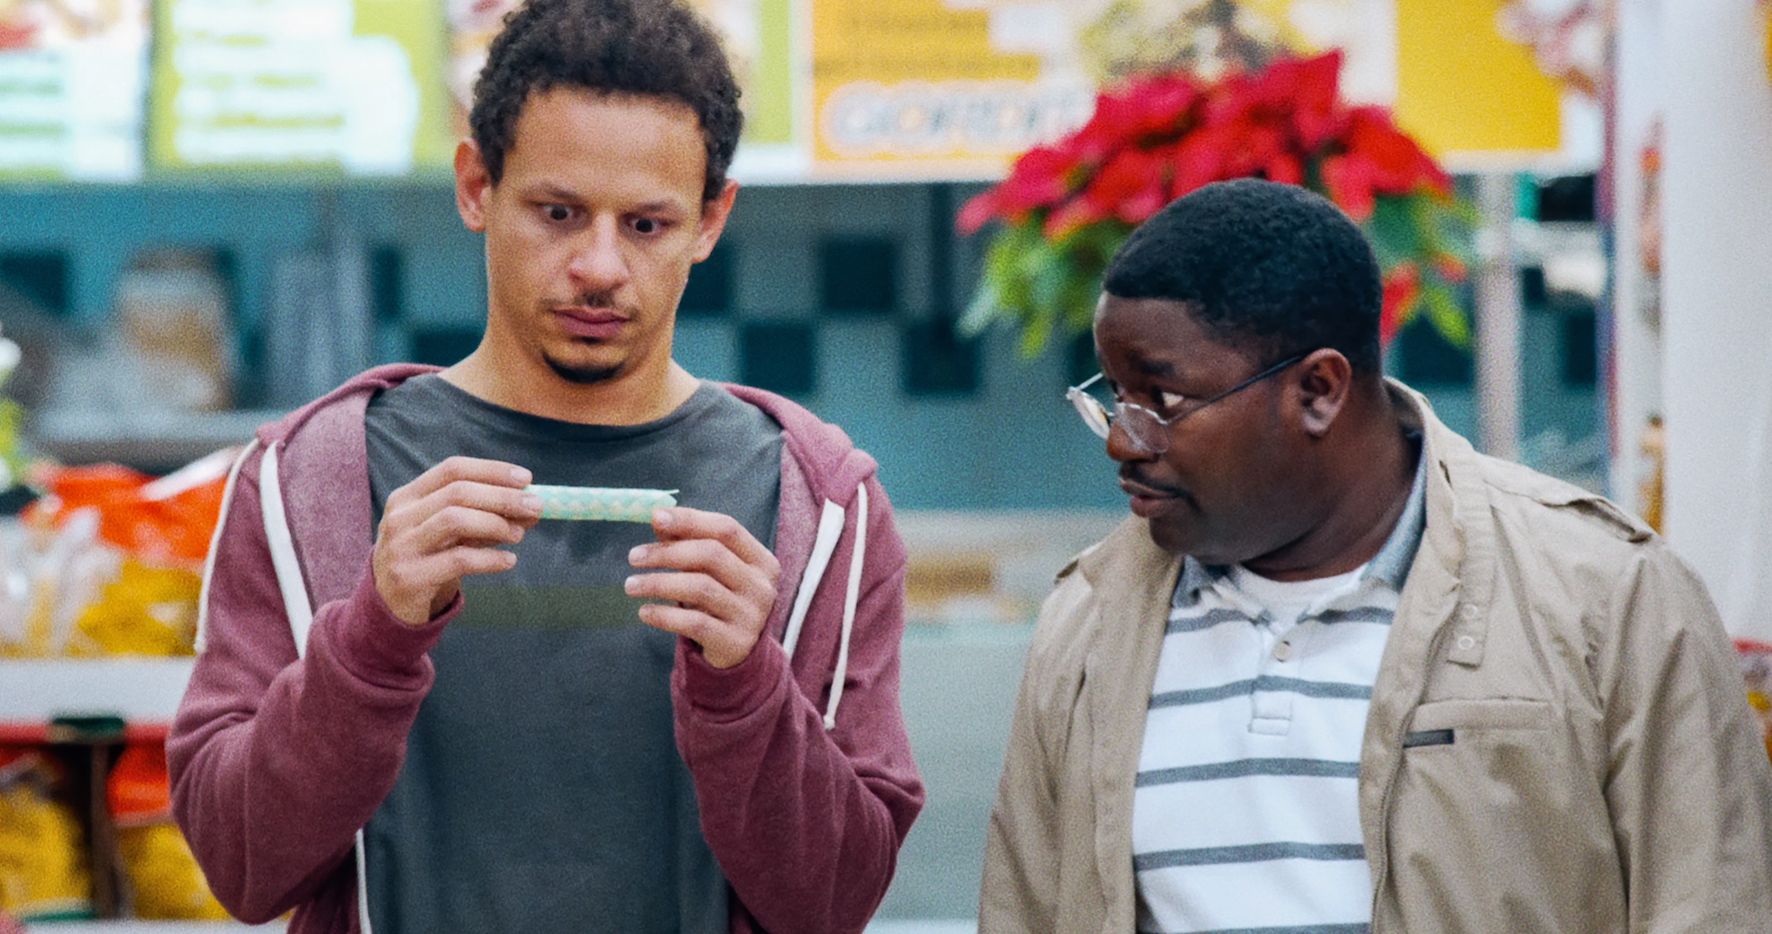 Bad Trip Prank Gone Wrong Had Eric Andre Truly Believing He Was About to Die